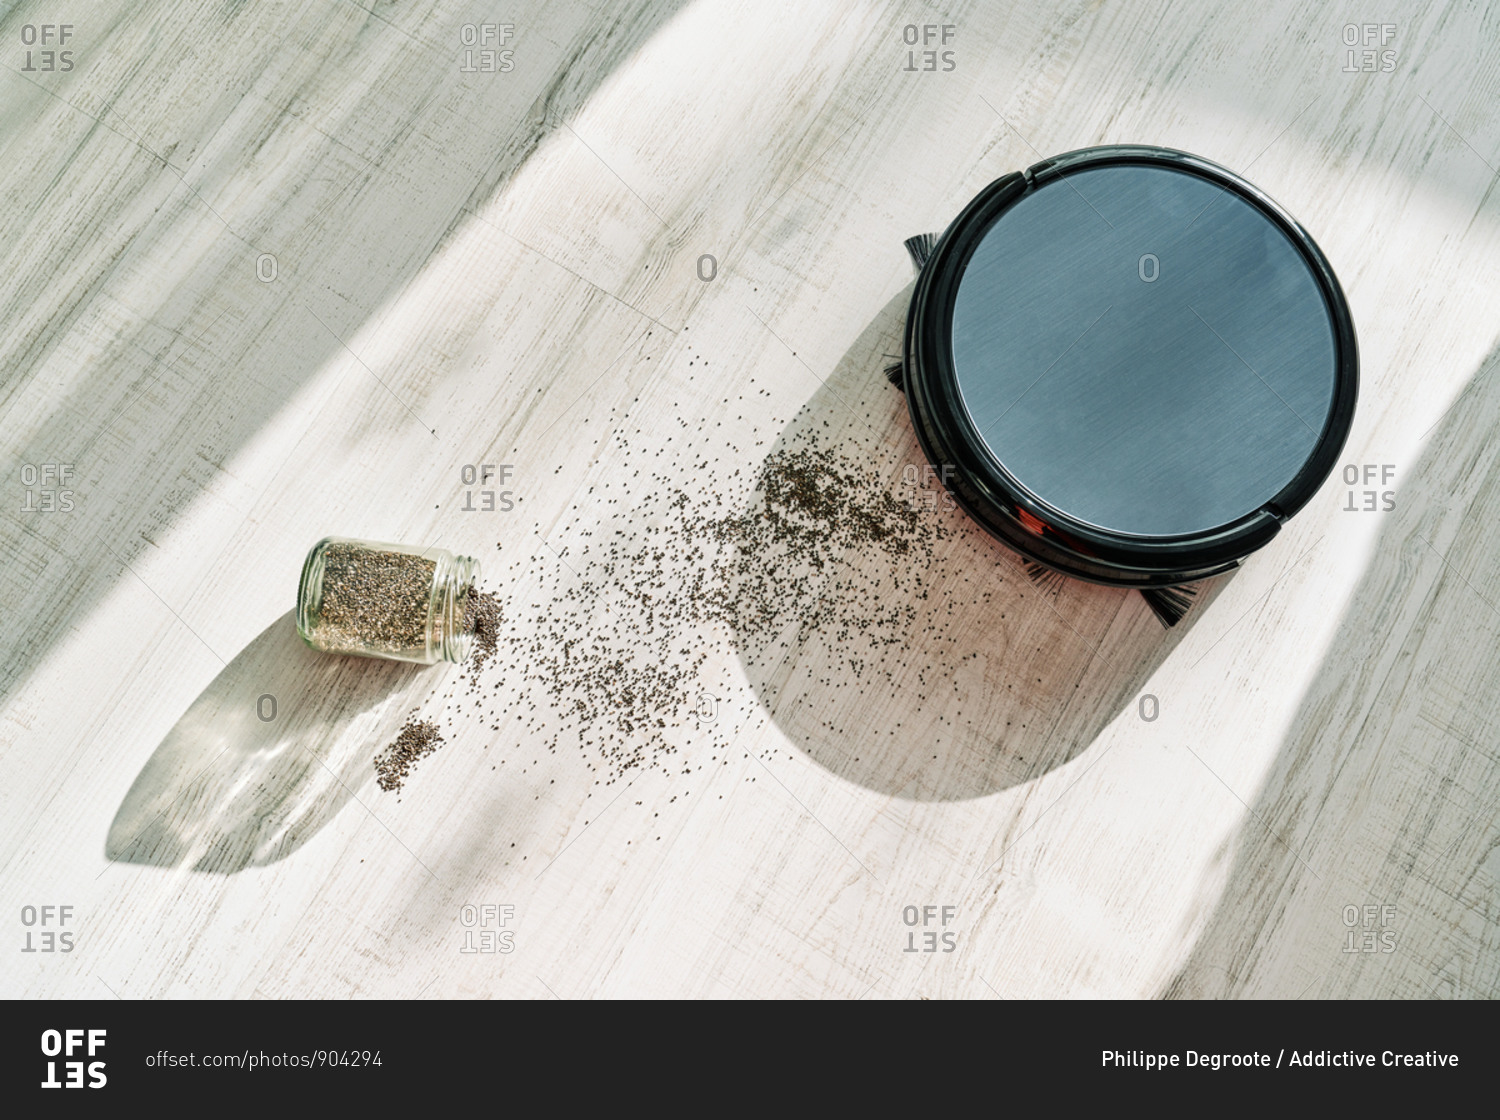 From above of round robotic vacuum cleaner sliding on light laminate floor and removing dirt spilled out of glass pot